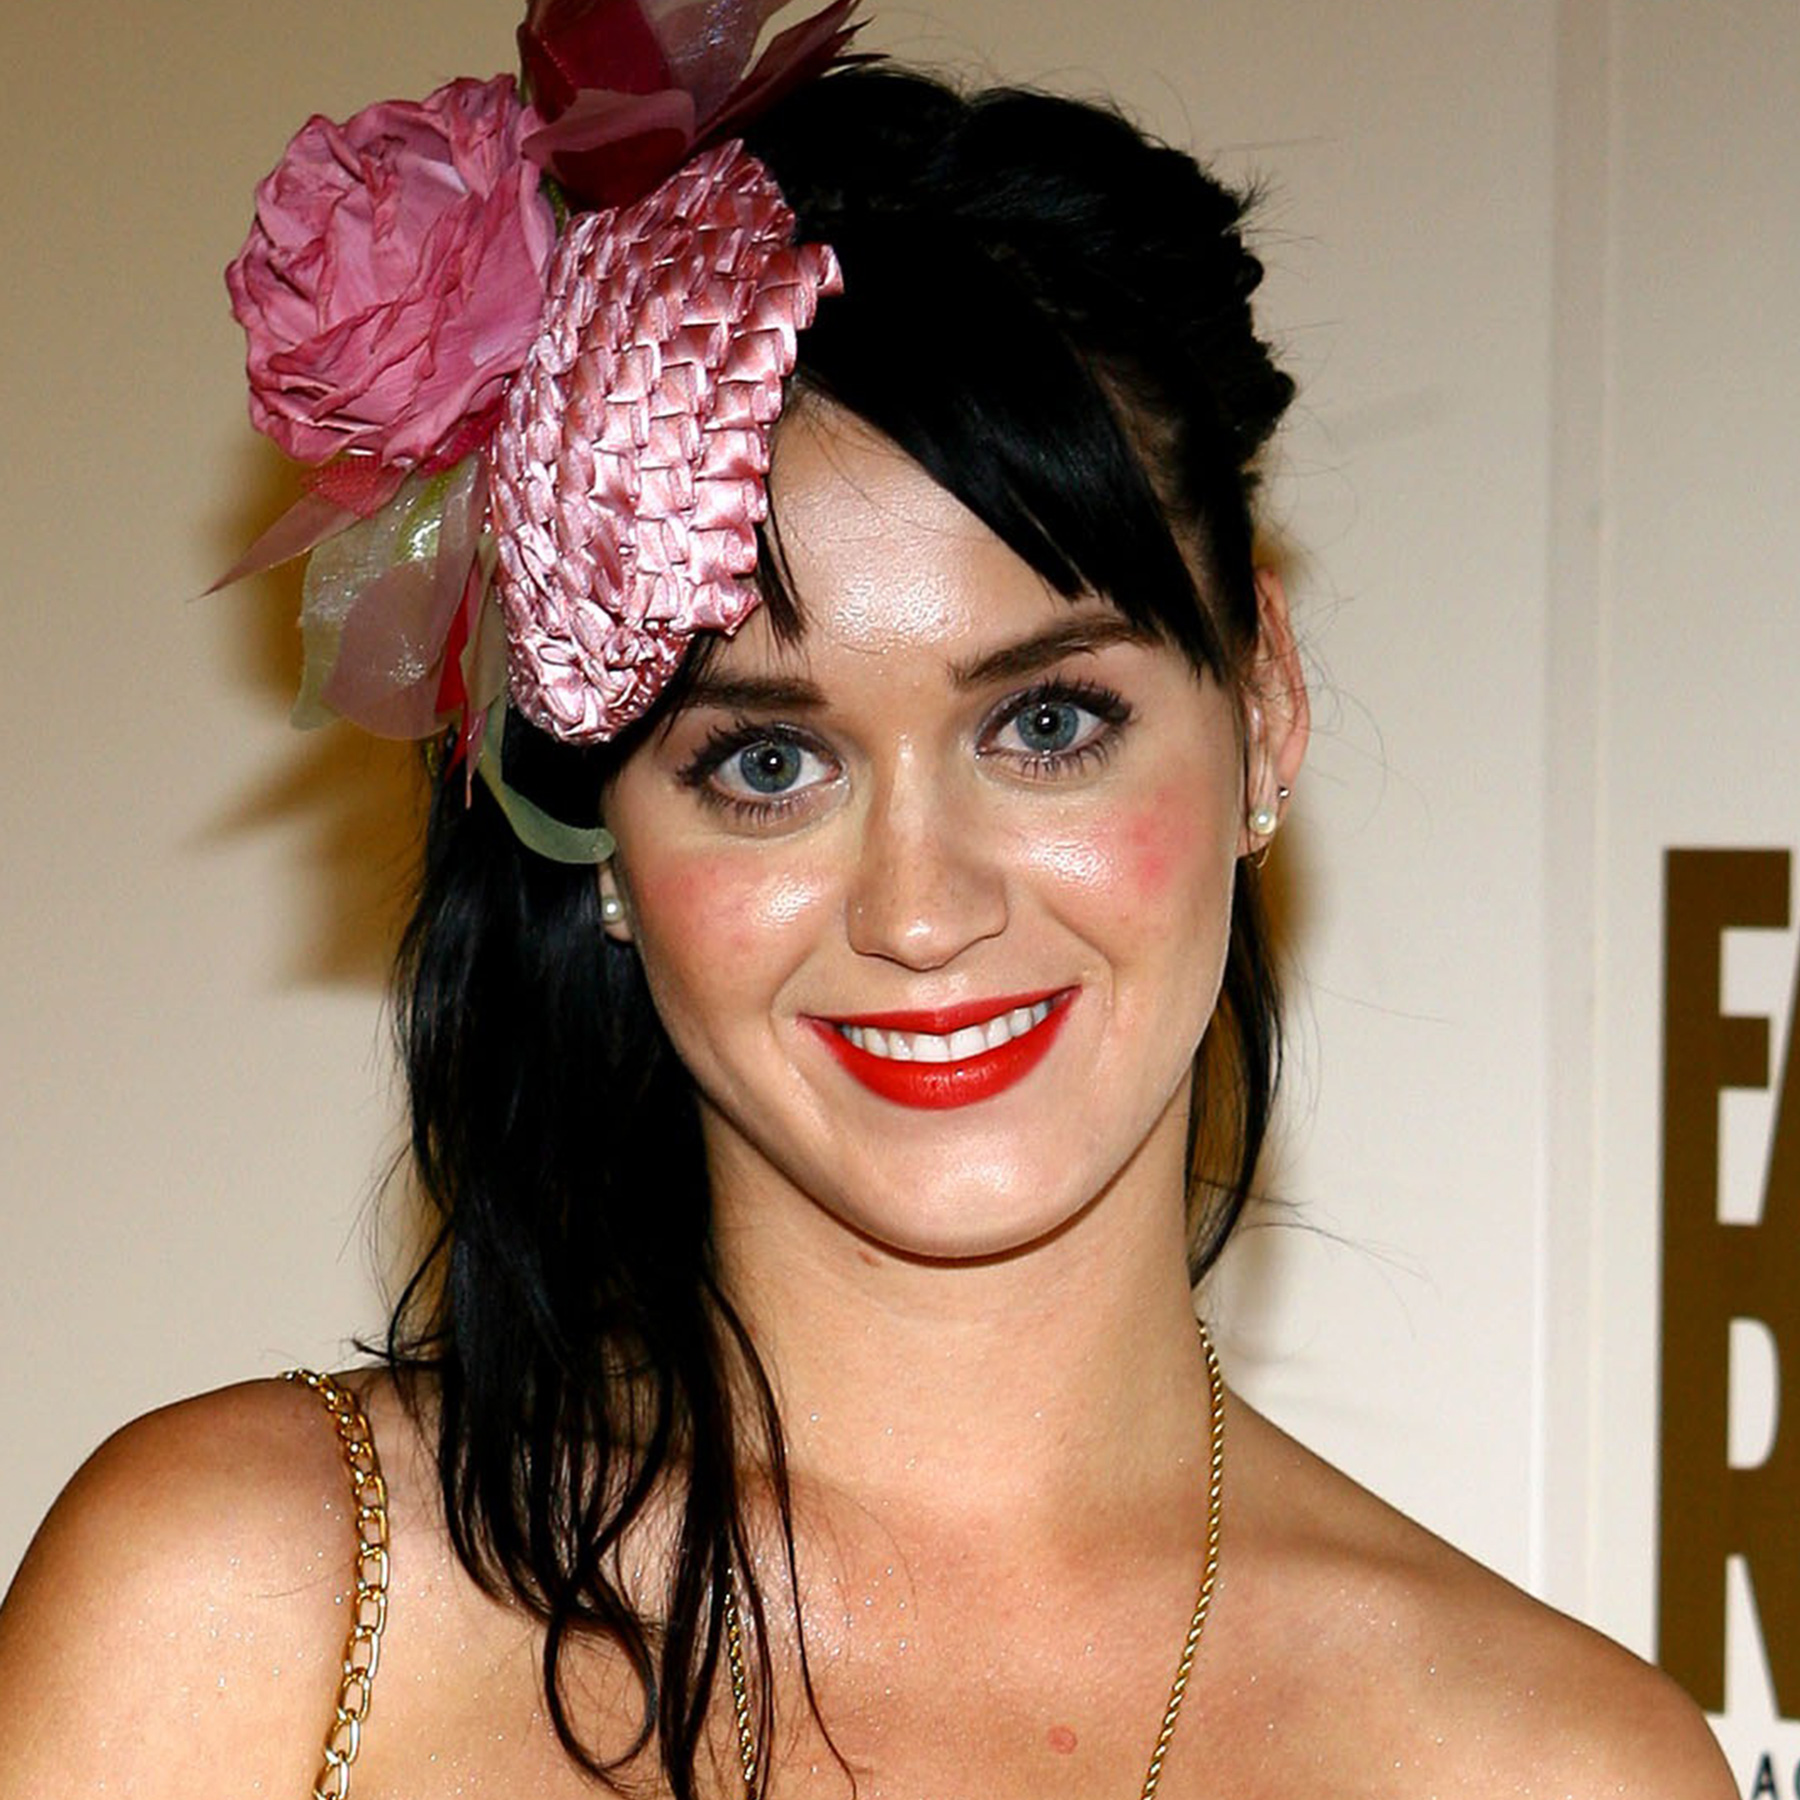 Katy Perrys Epic Hairstyle Evolution Over Time  K4 Fashion